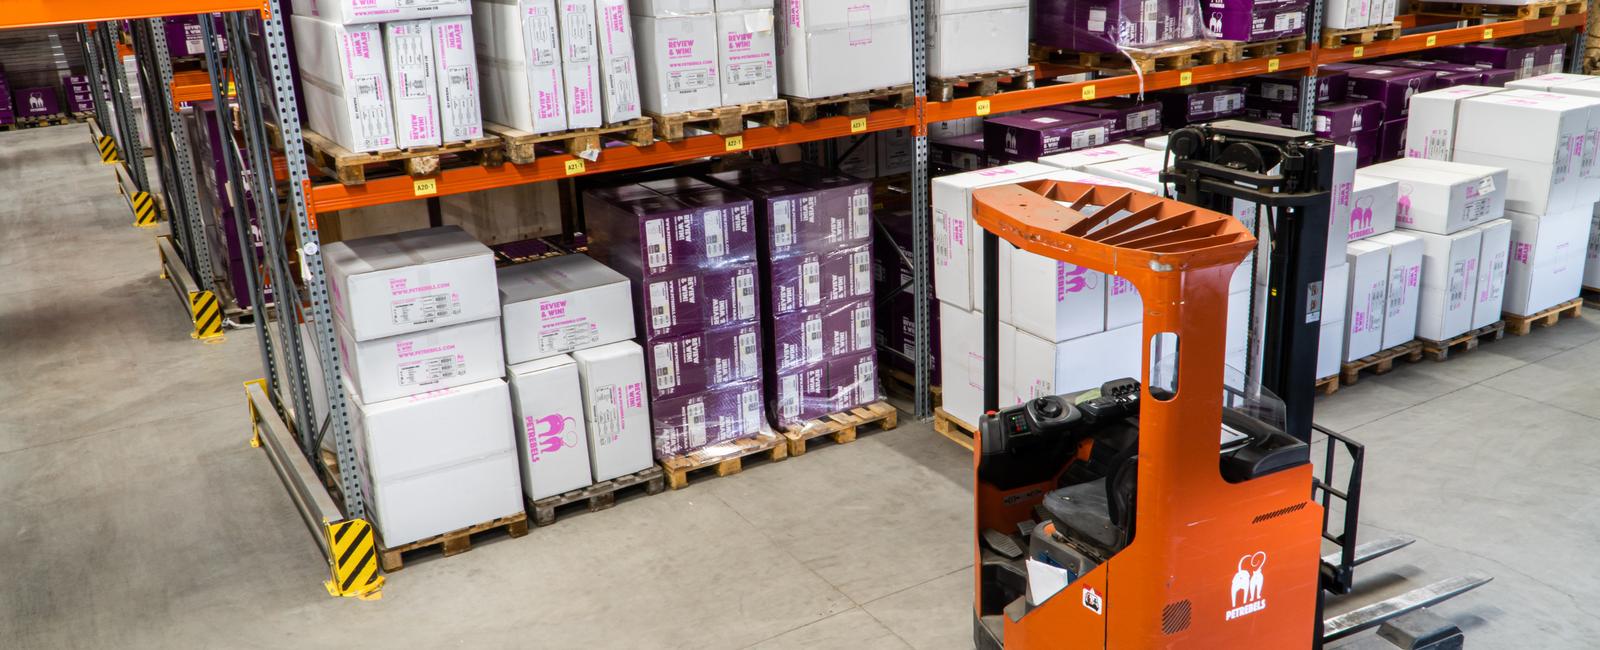 Top 5 useful tips to improve your inventory control